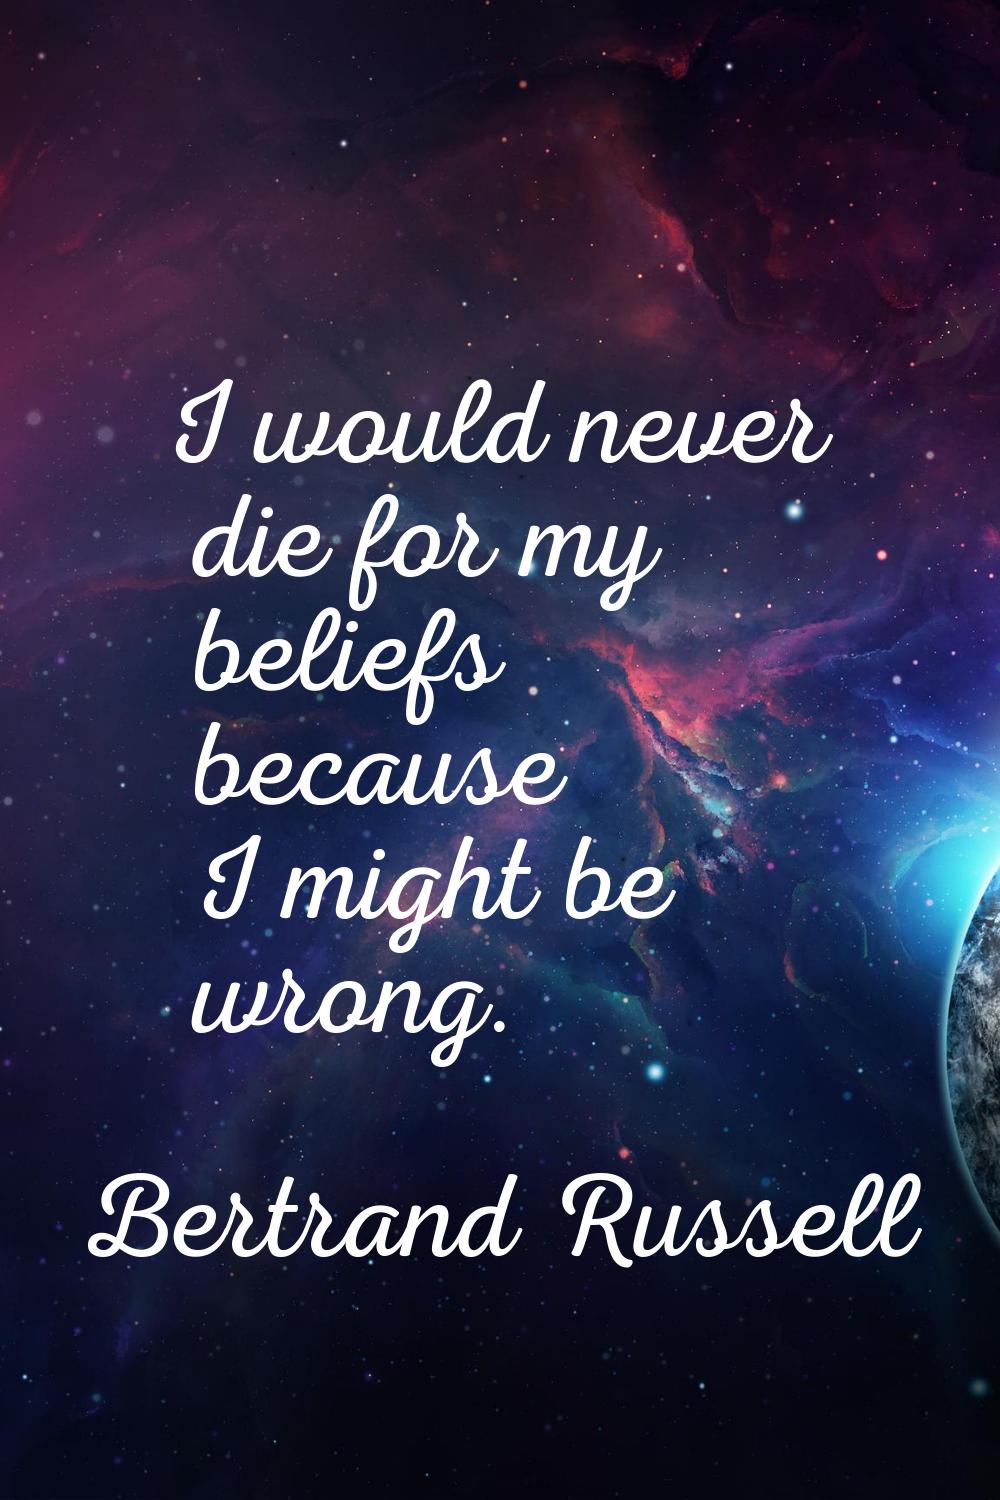 I would never die for my beliefs because I might be wrong.